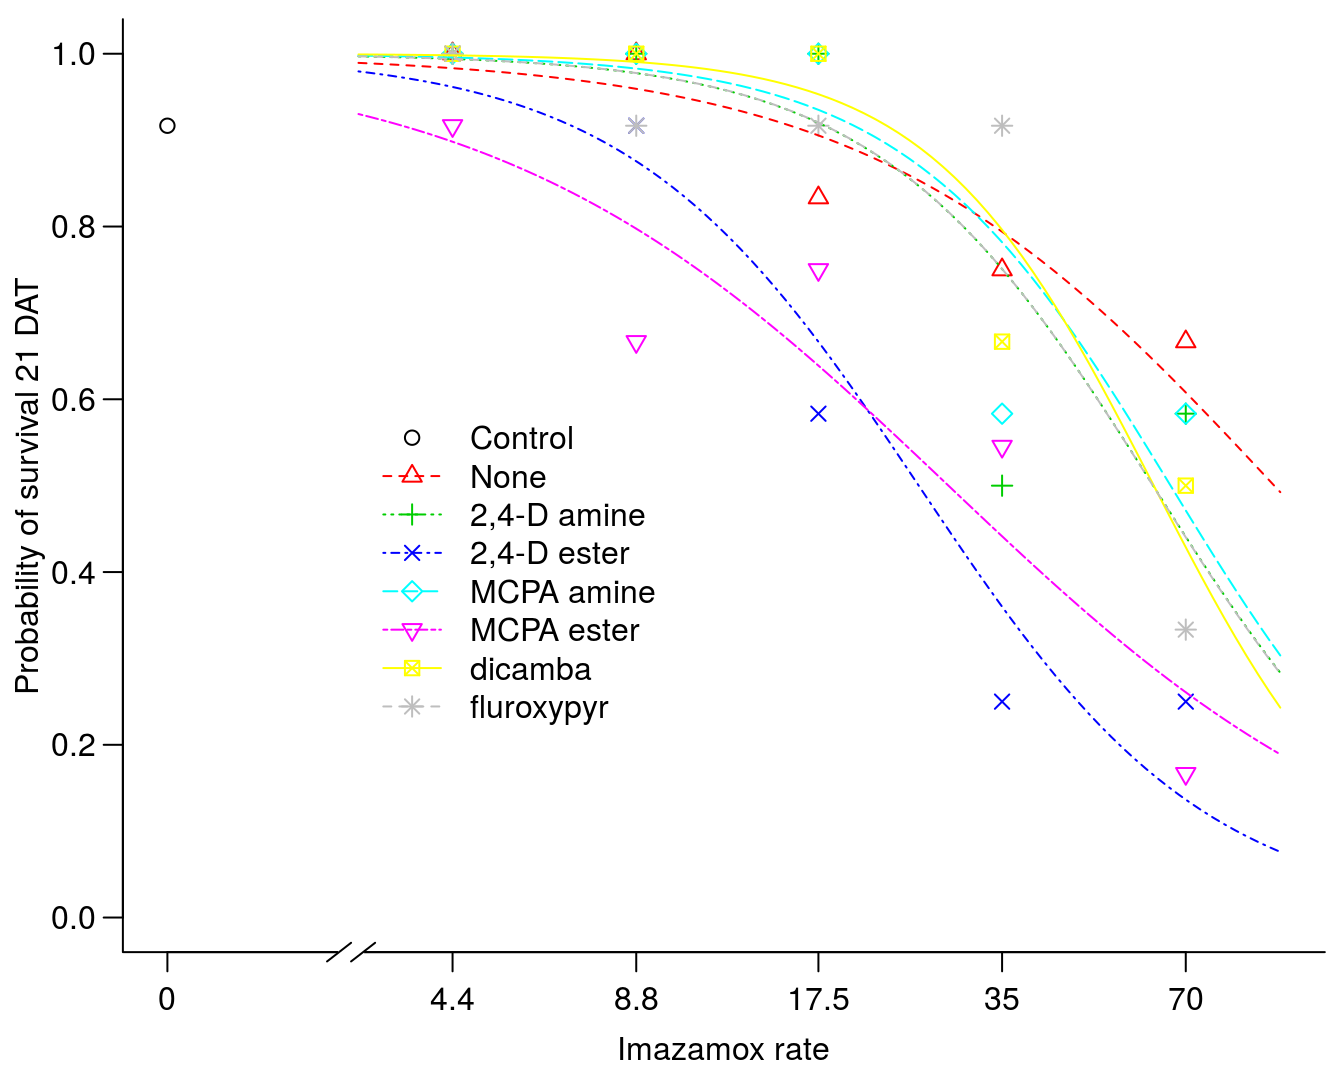 The effect of imazamox rate with and without auxin-mimic herbicides on rye survival.